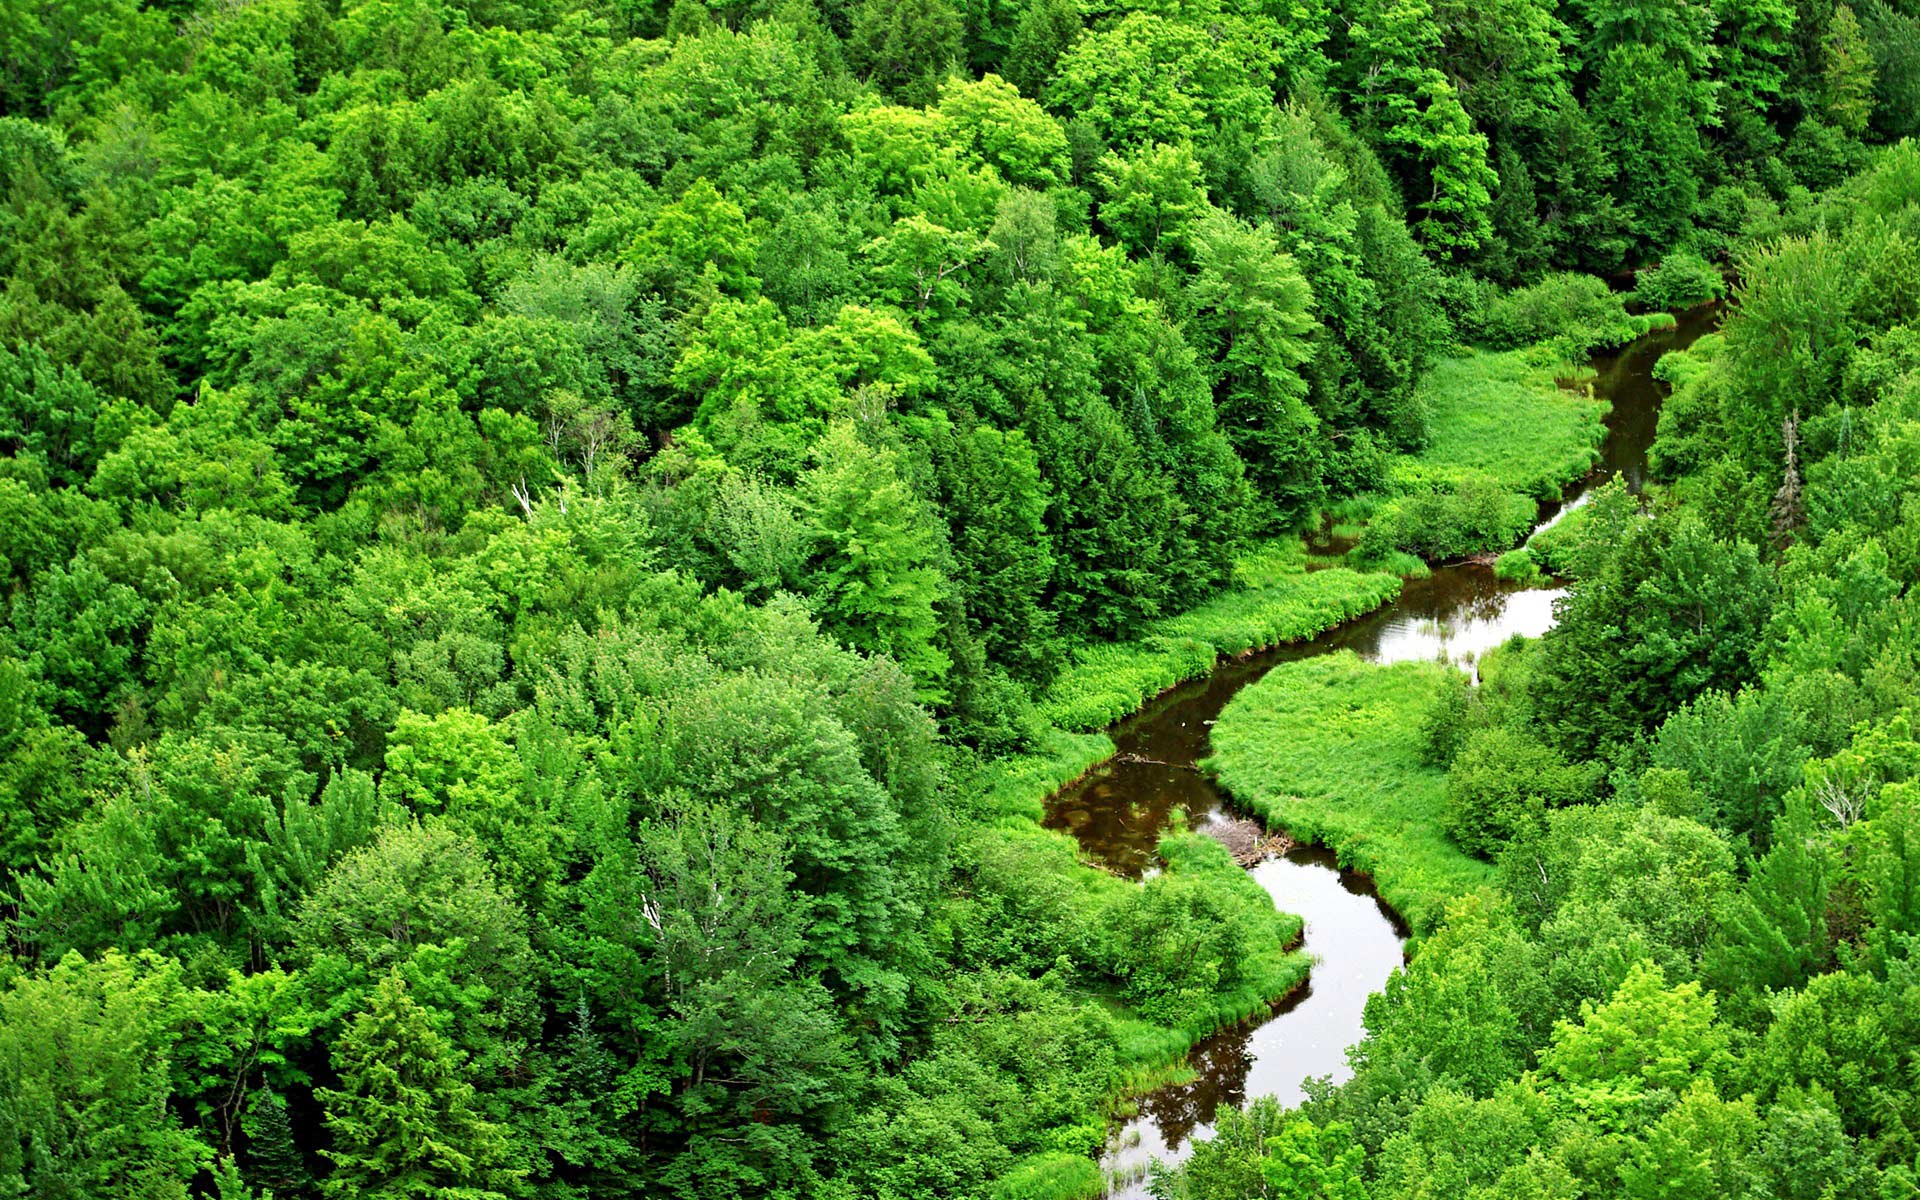 Image: http://www.desktopwallpaperhd.net/wallpapers/7/4/forest-green-scenery-wallpapers-landscape-stream-river-awesome-images-computer-74132.jpg